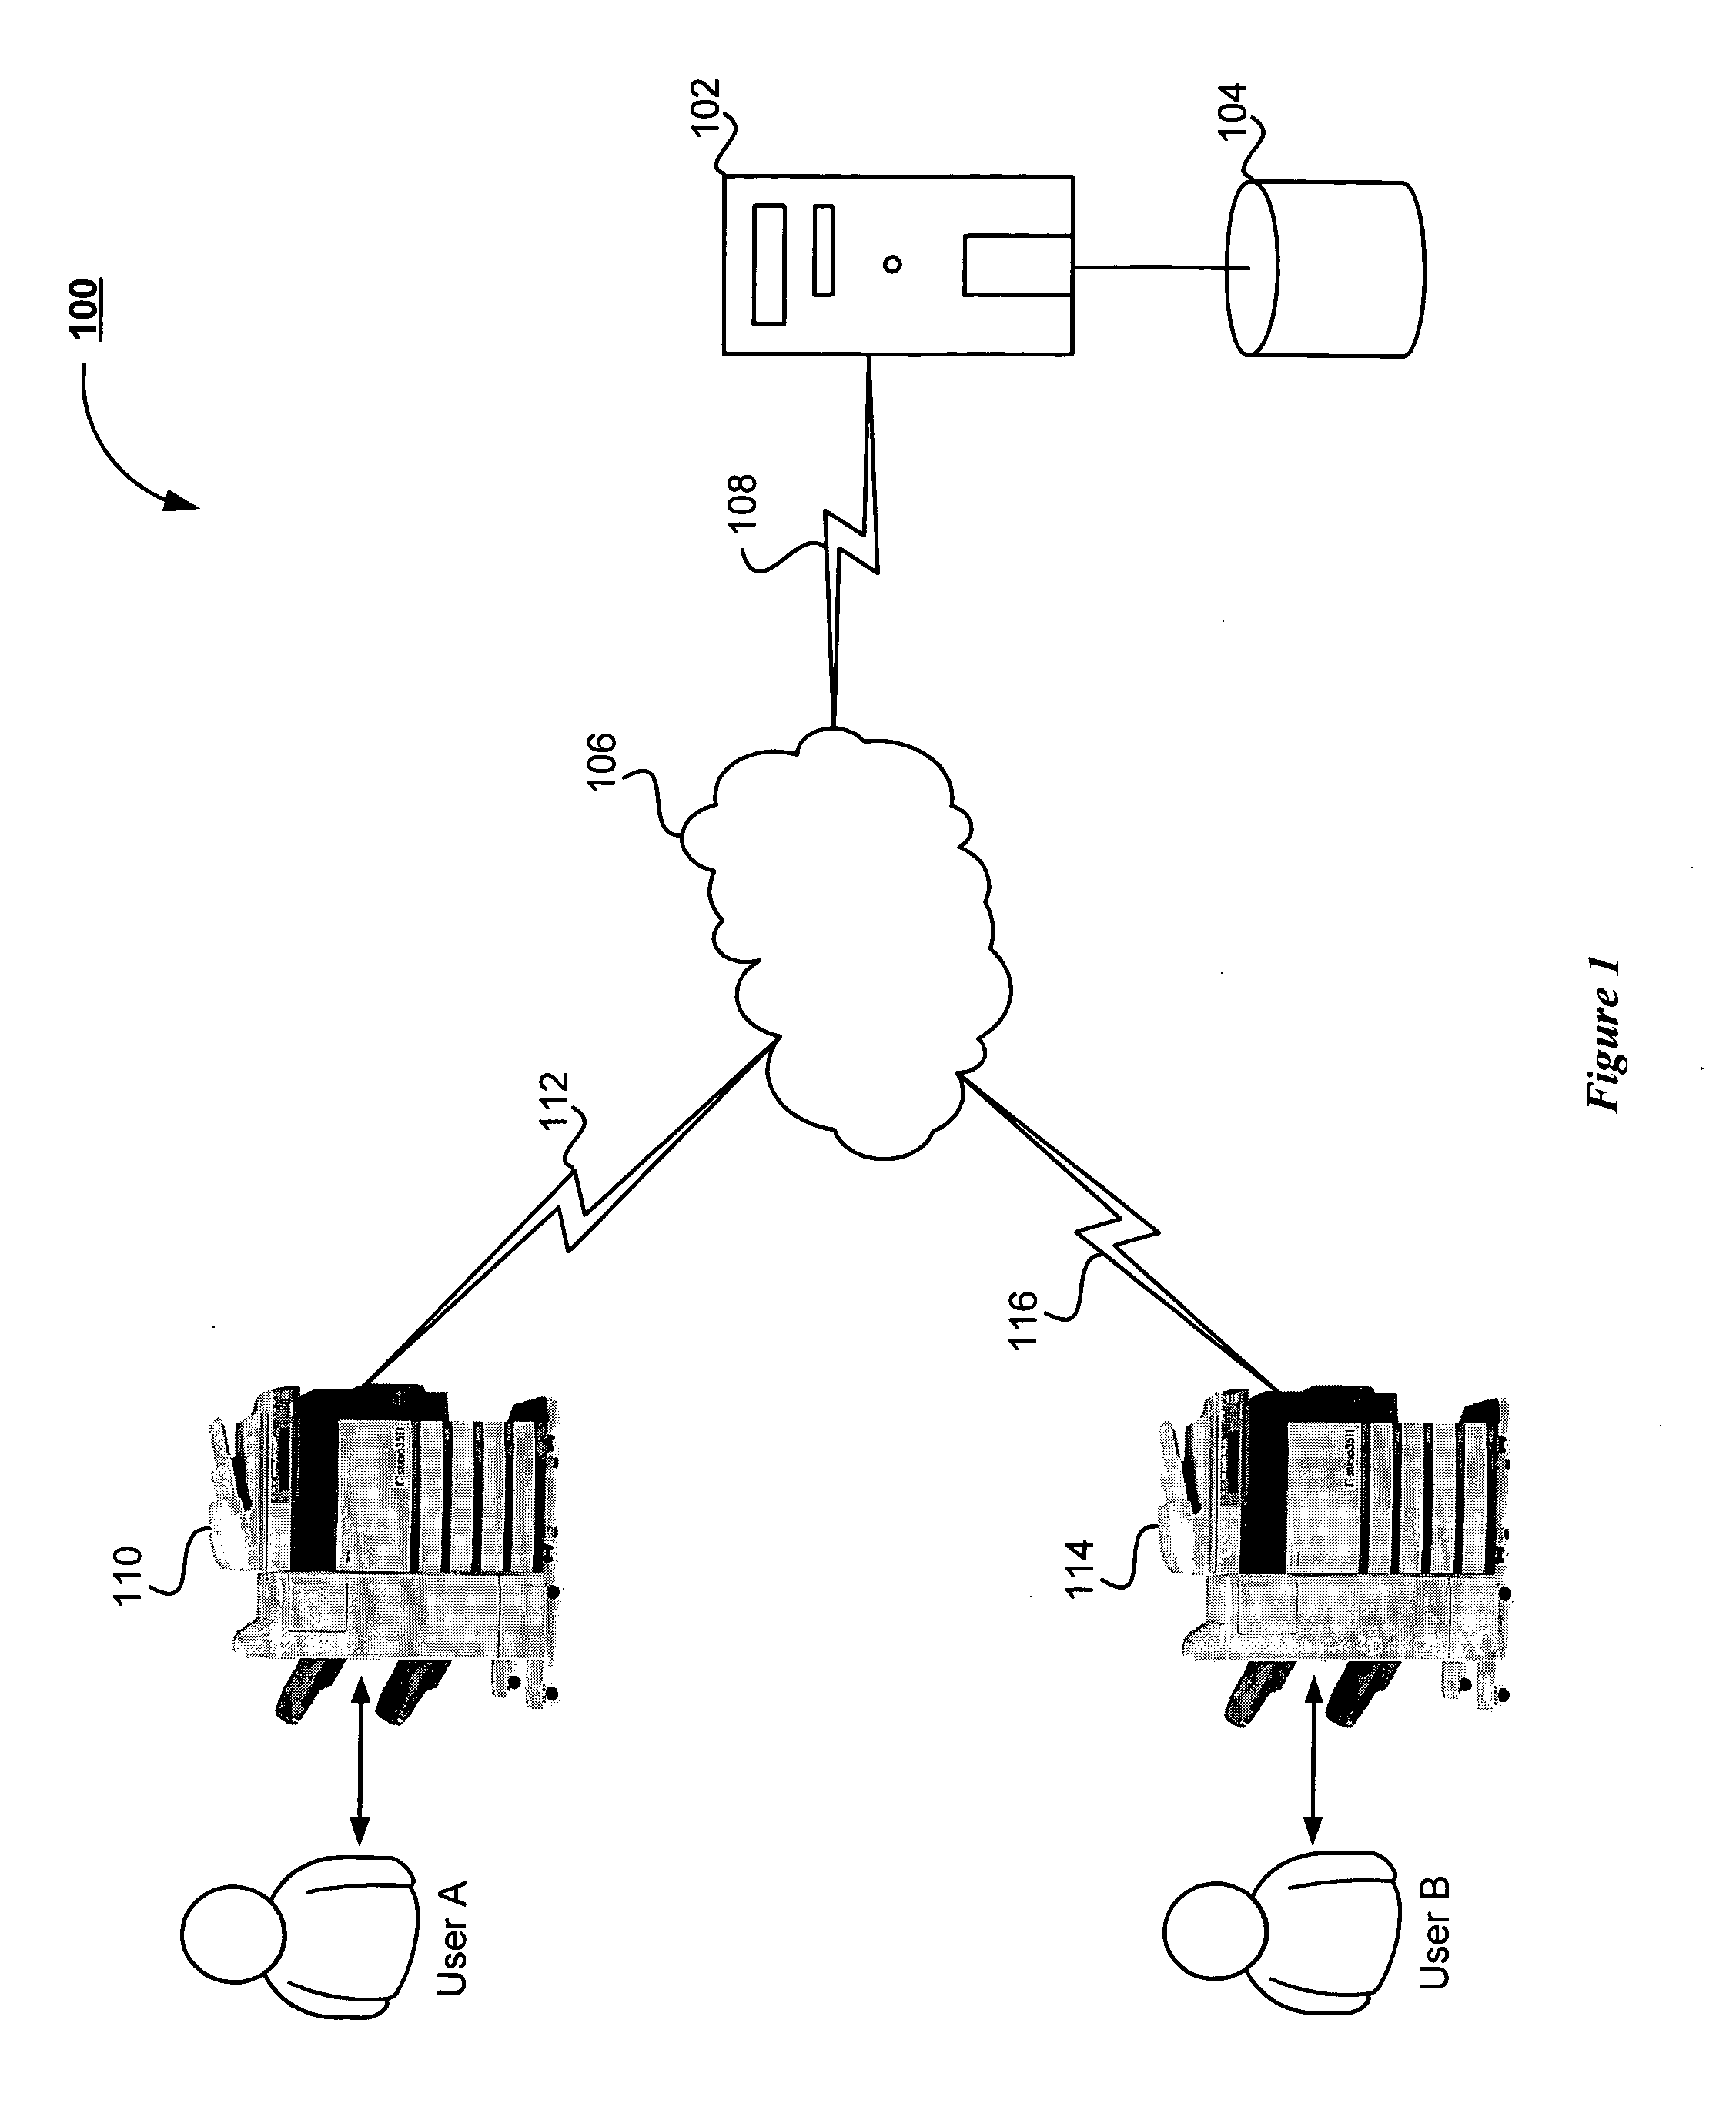 System and method for secure facsimile transmission